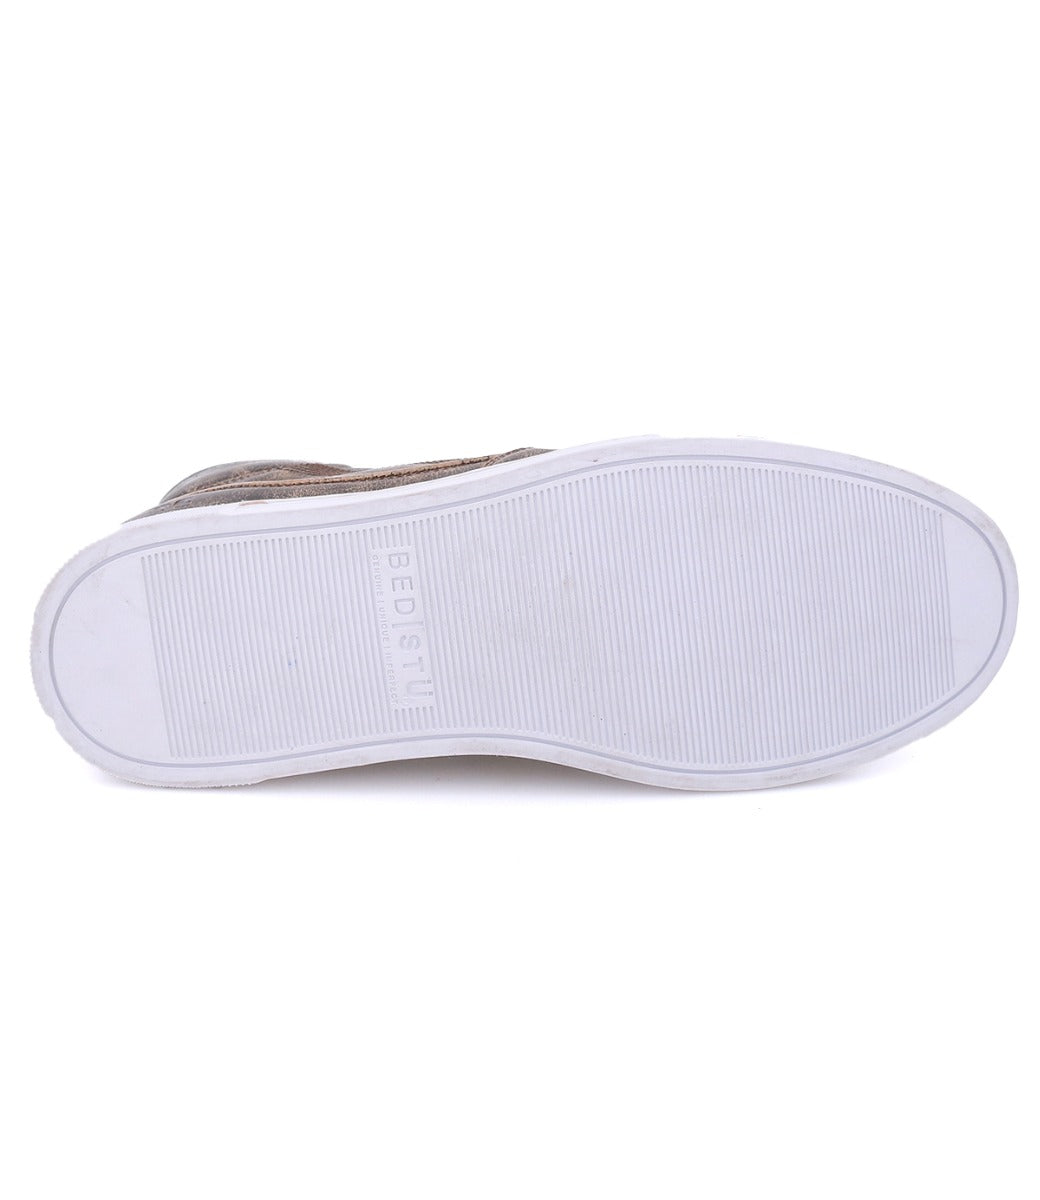 A pair of Lordmind sneakers with white soles on a white background by Bed Stu.